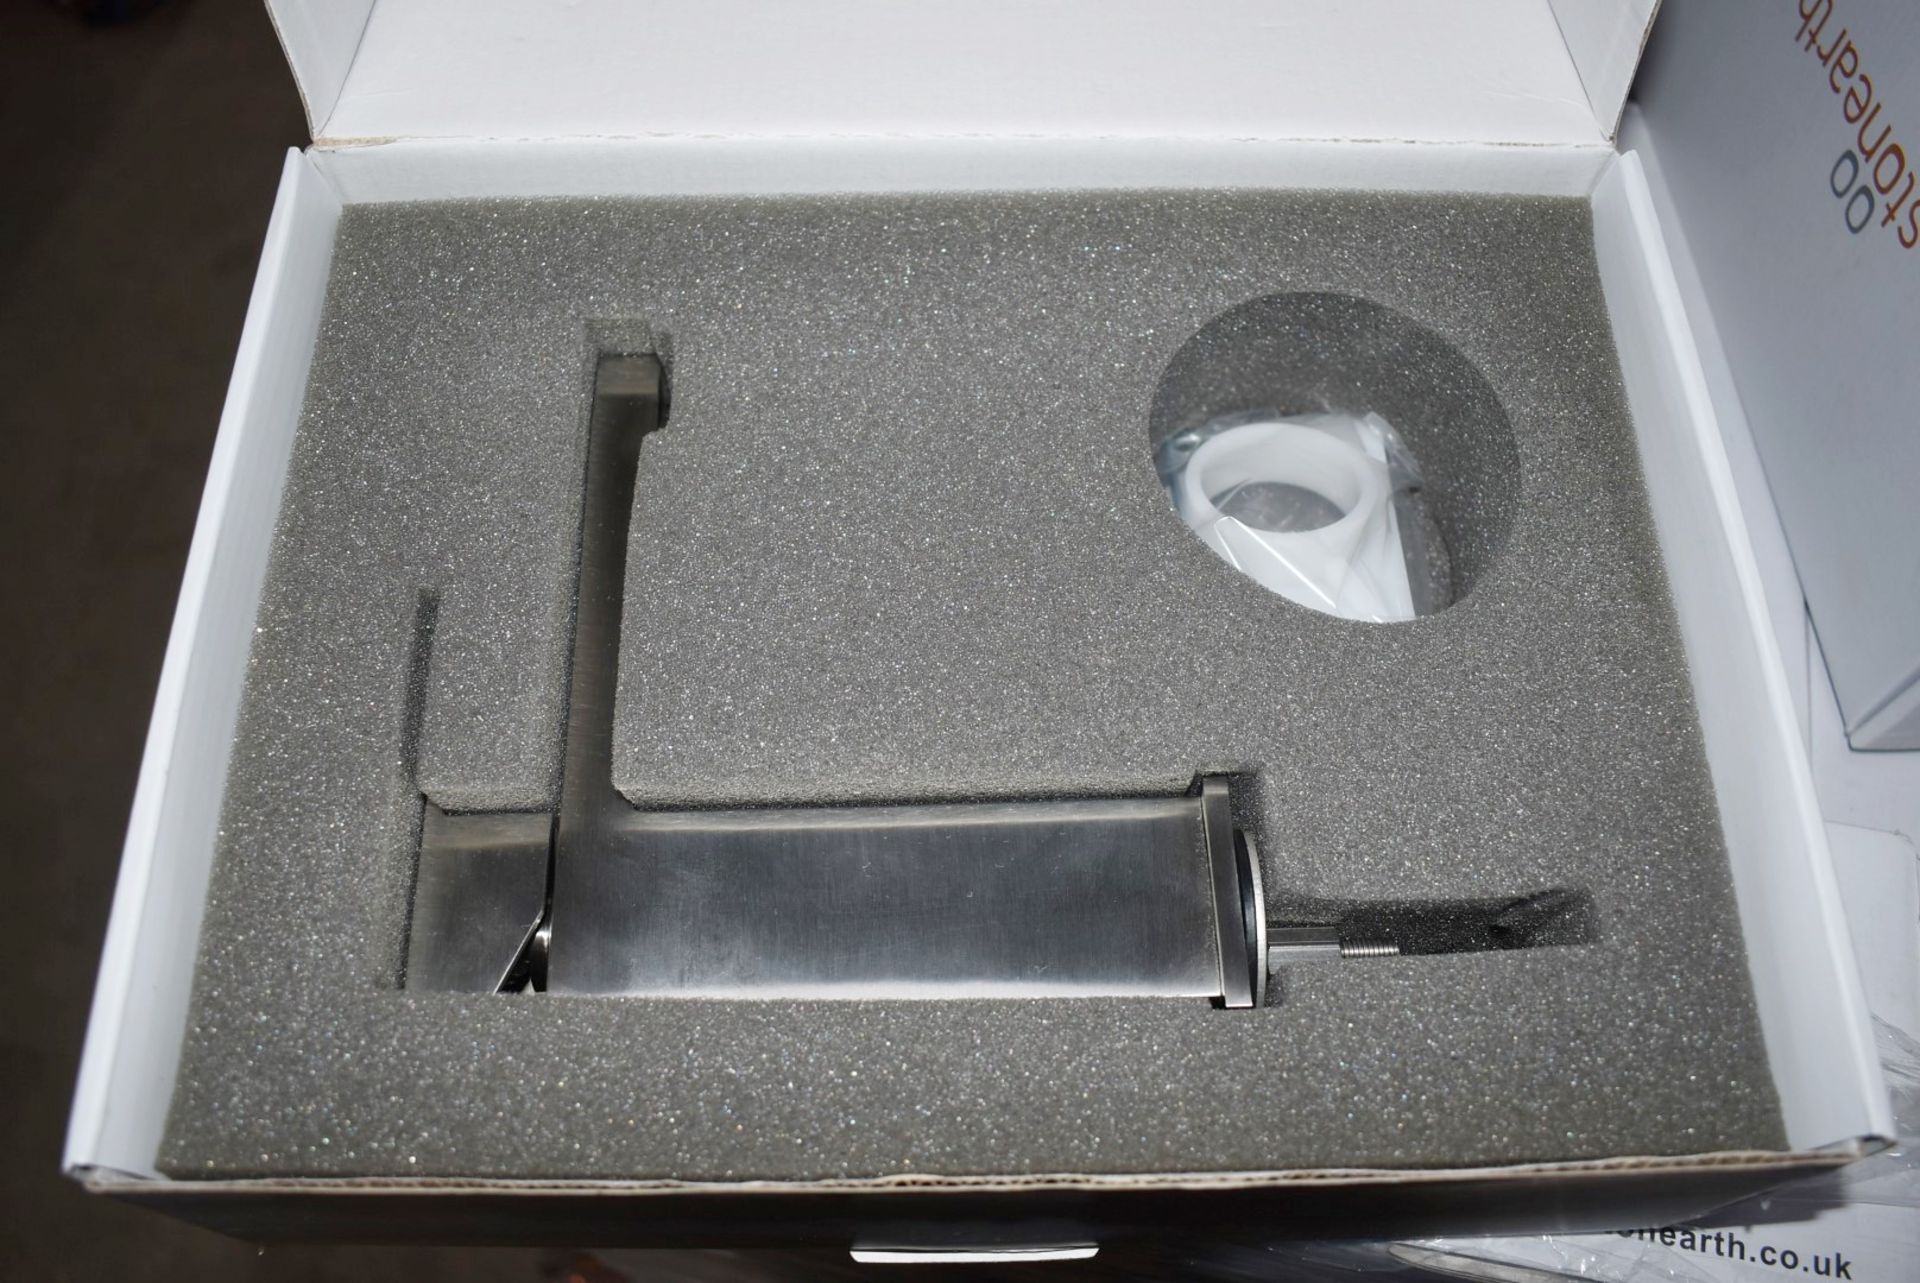 1 x Stonearth 'Metro' Stainless Steel Basin Mixer Tap - Brand New & Boxed - RRP £245 - Ref: TP821 - Image 11 of 13